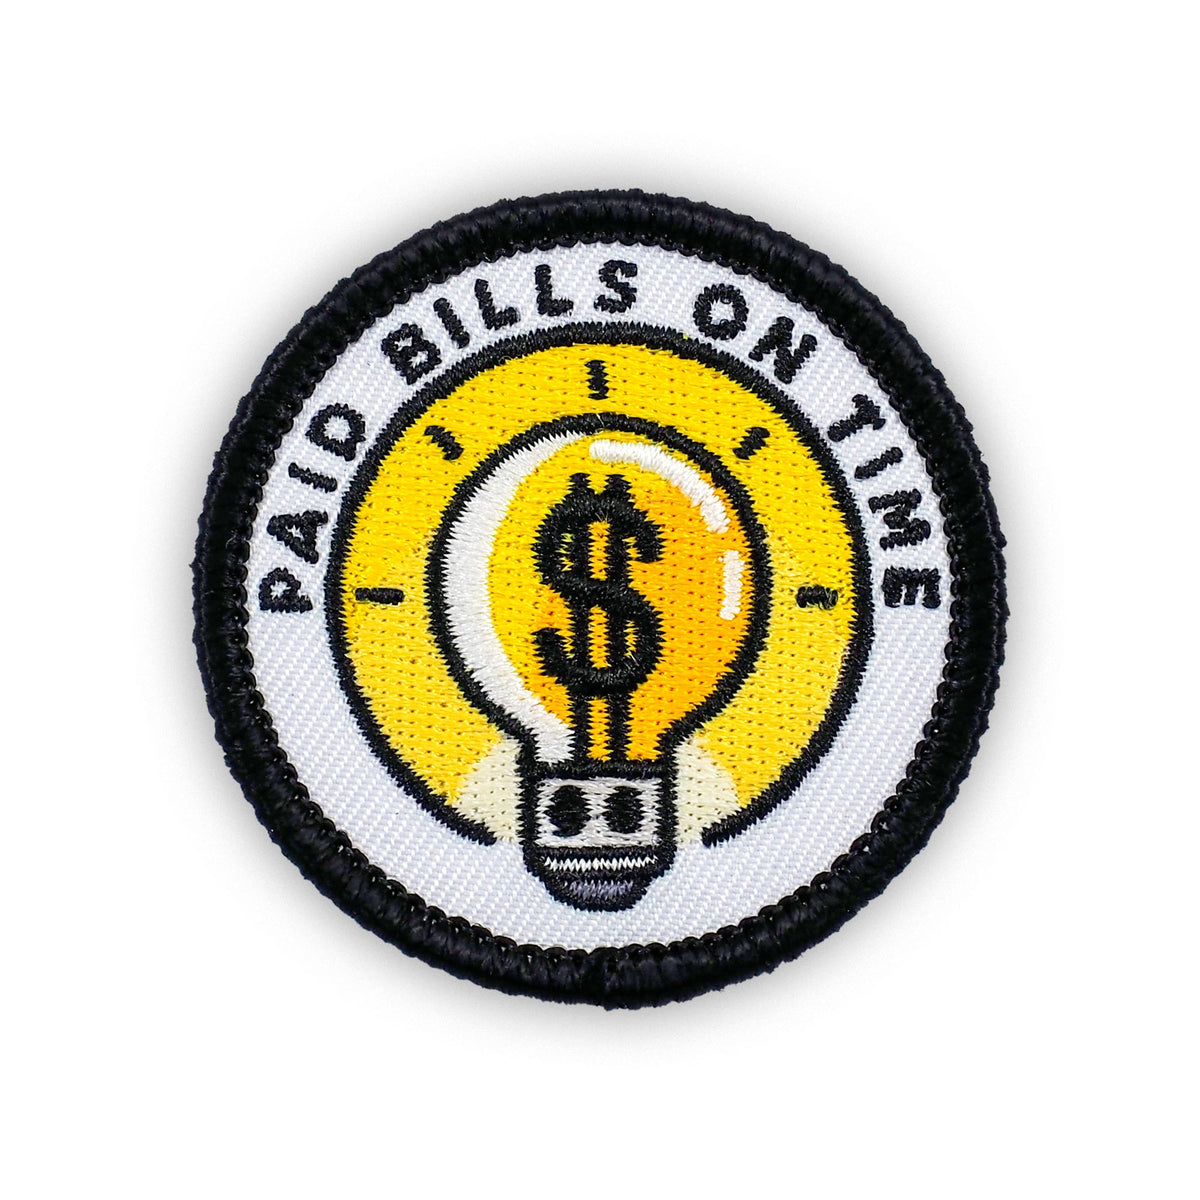 Paid Bills On Time adulting merit badge patch for adults